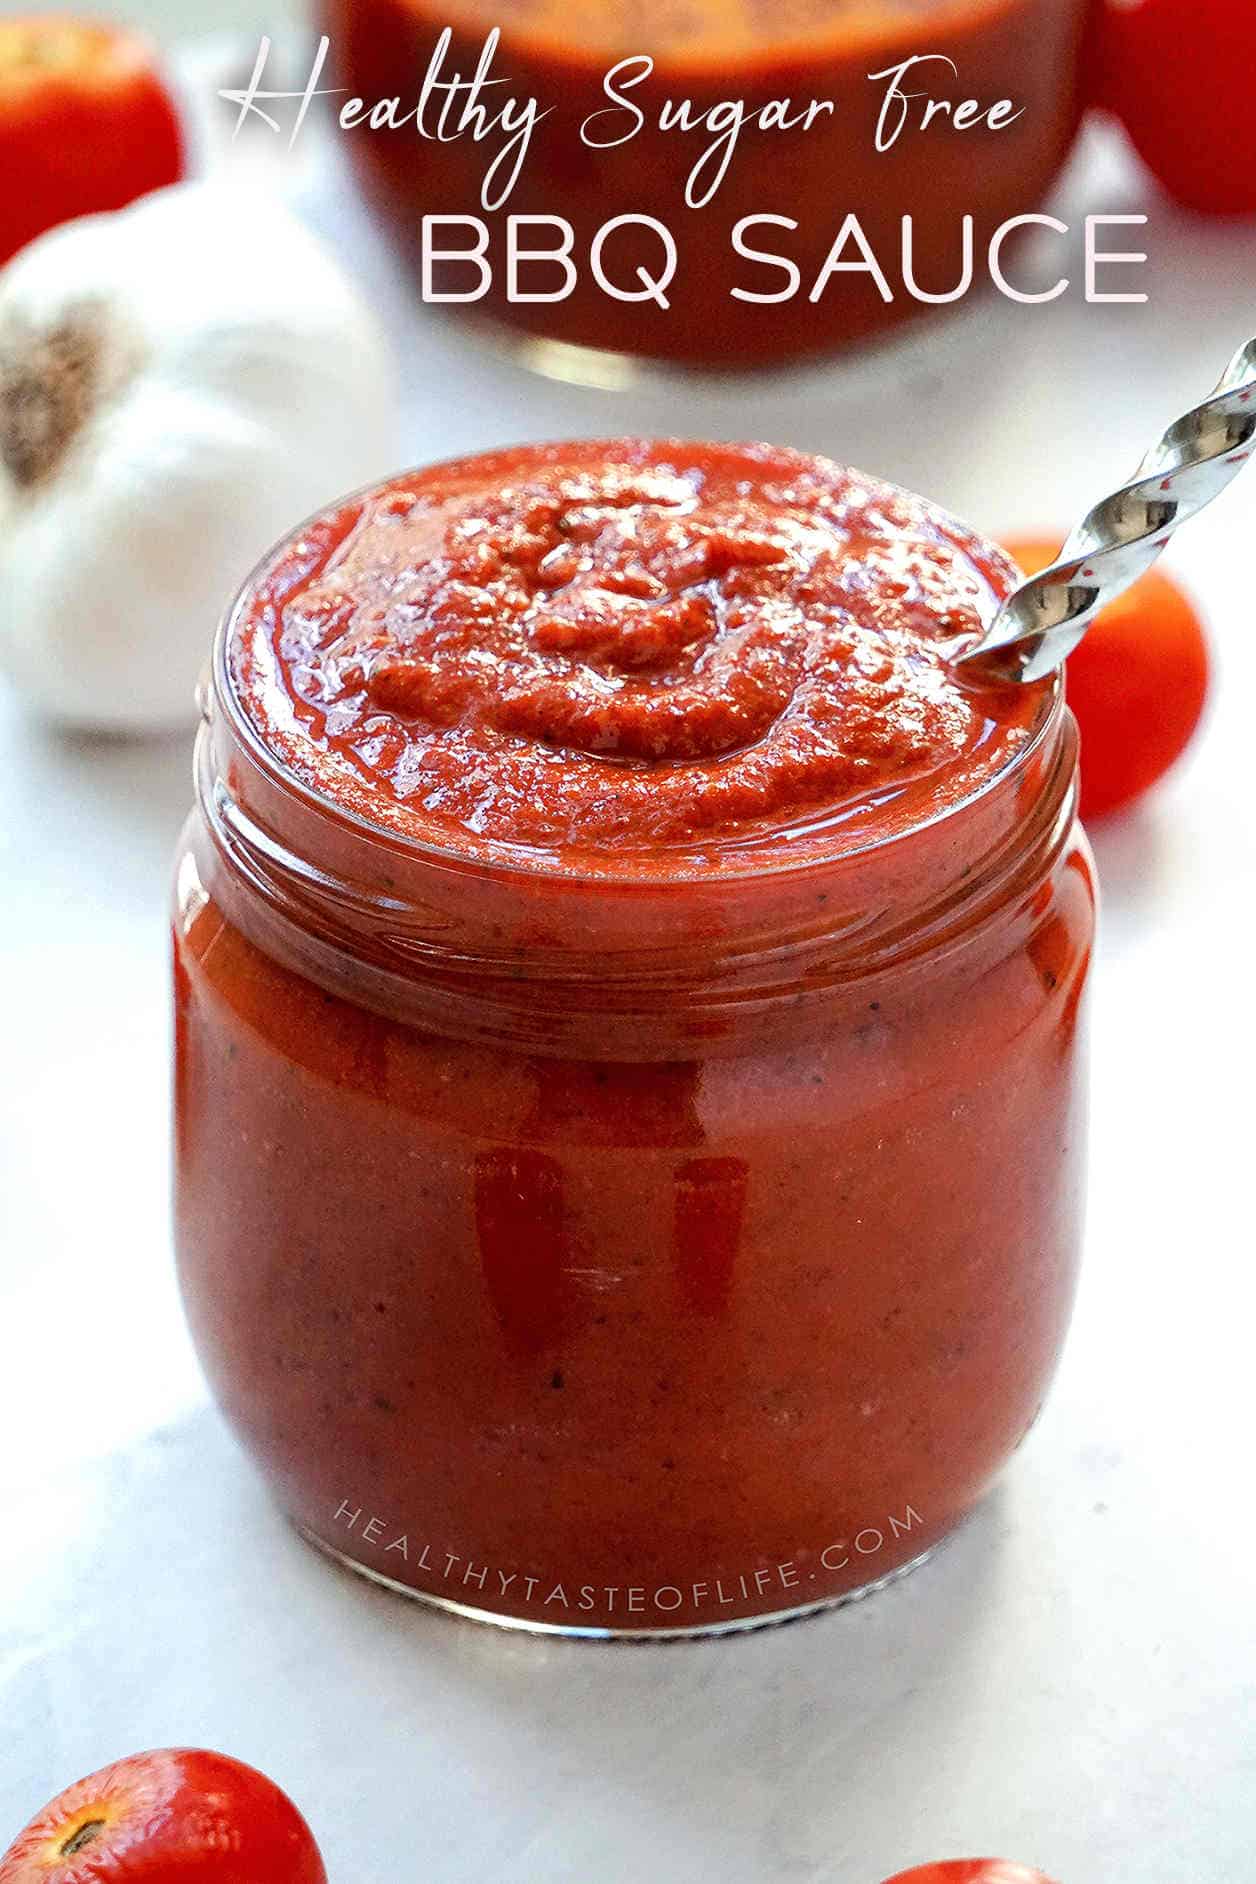 Learn how to make a healthy sugar free whole30 BBQ sauce from scratch. This clean eating paleo BBQ sauce recipe is made without ketchup, its sugar free, gluten free and dairy free. A healthy keto, paleo and whole30 BBQ sauce that is made with clean whole foods – low carb, vegan and kid friendly